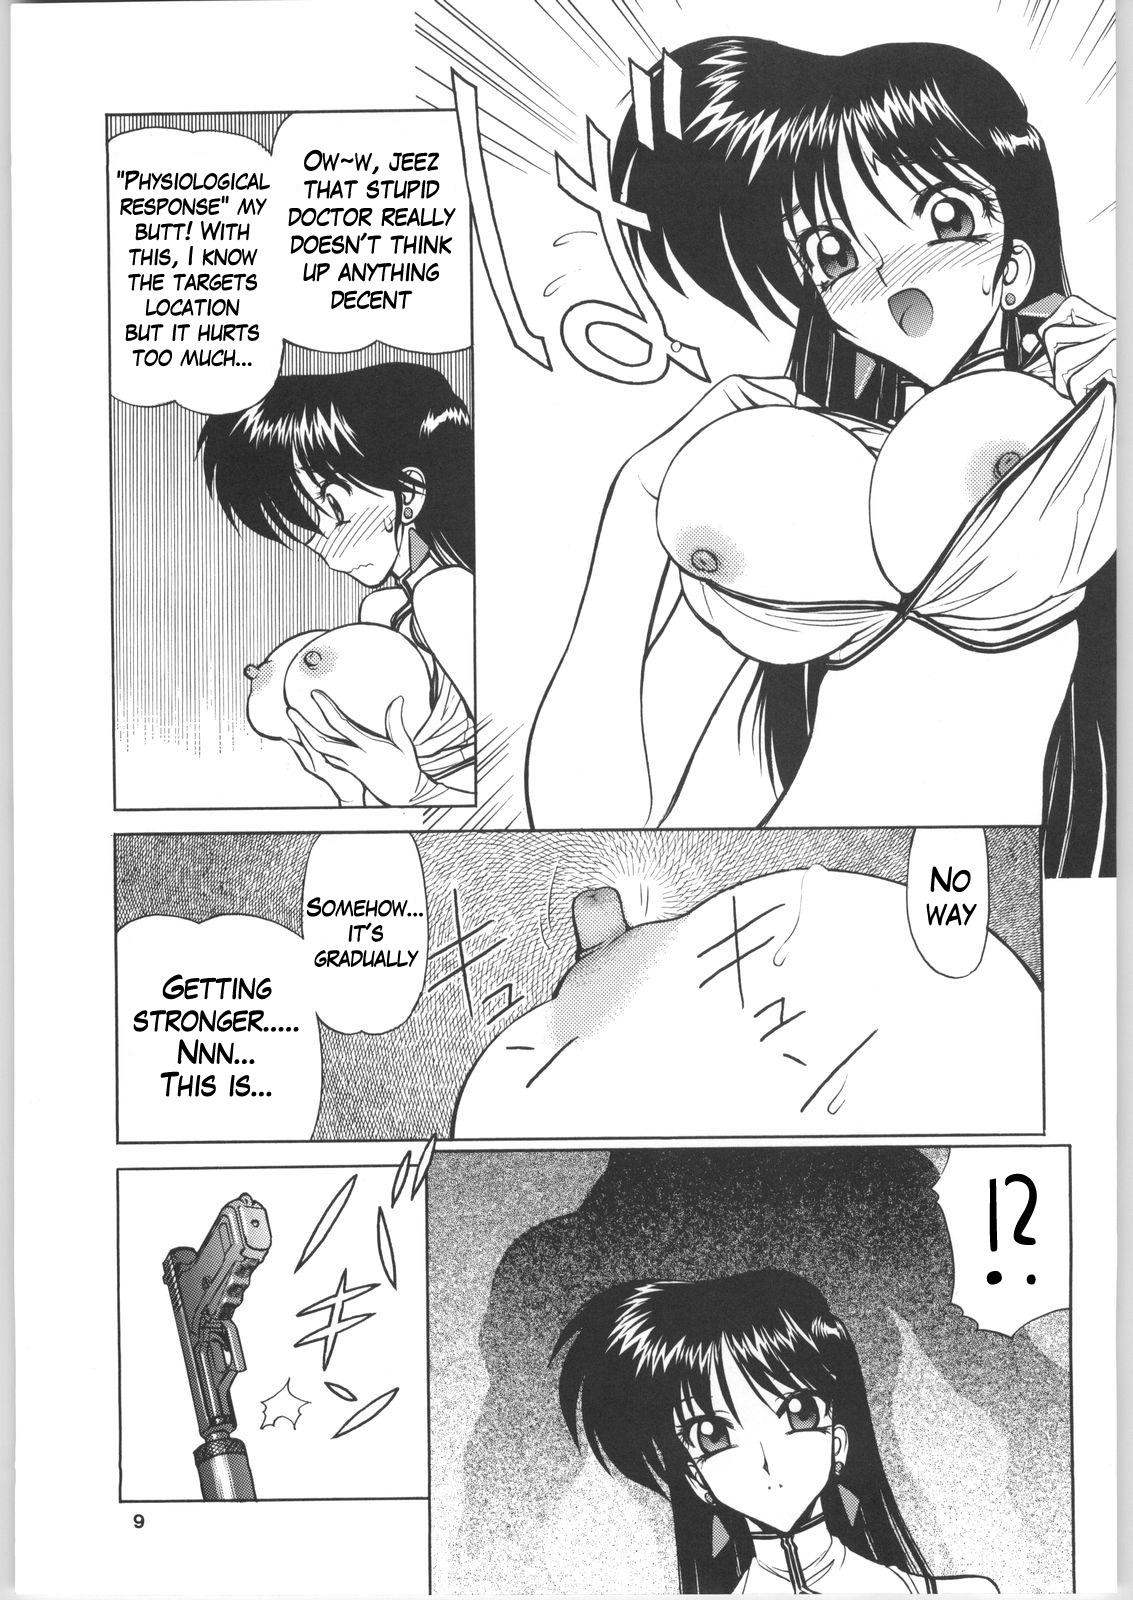 Khmer NNDP 4 - Dirty pair Buttfucking - Page 8